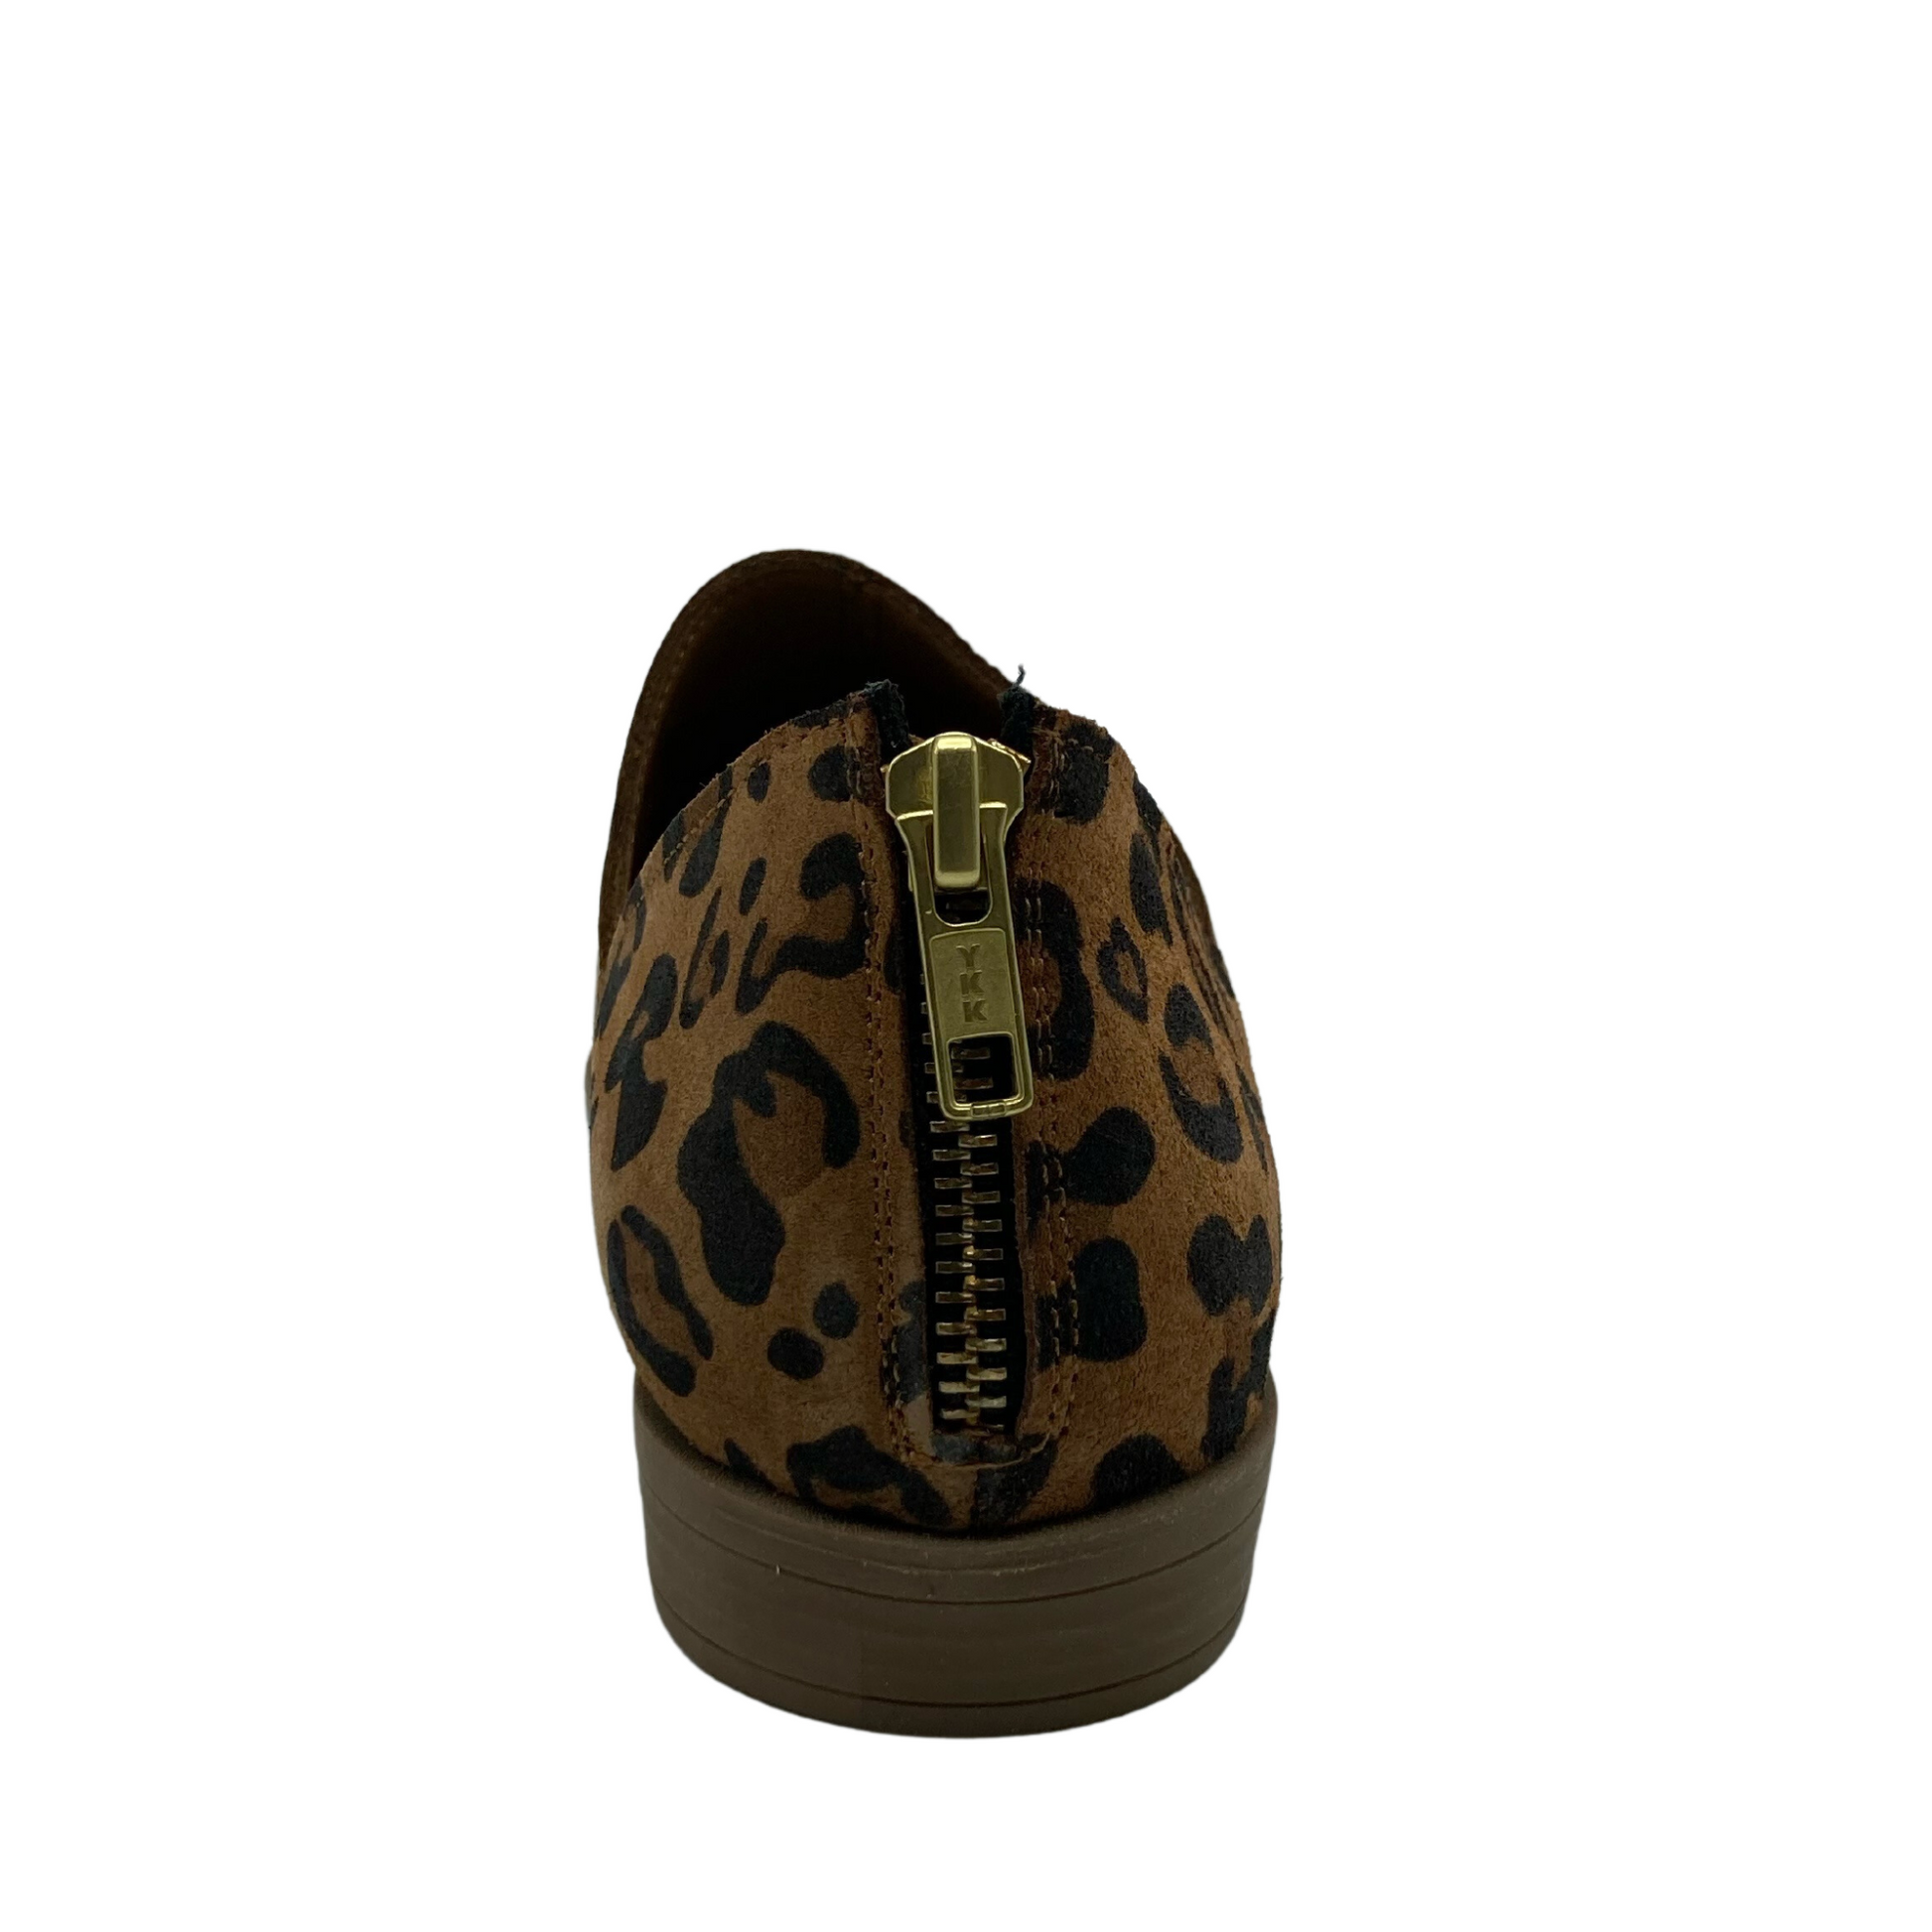 Hind view of low heeled leather shoe with leopard pattern and gold zipper